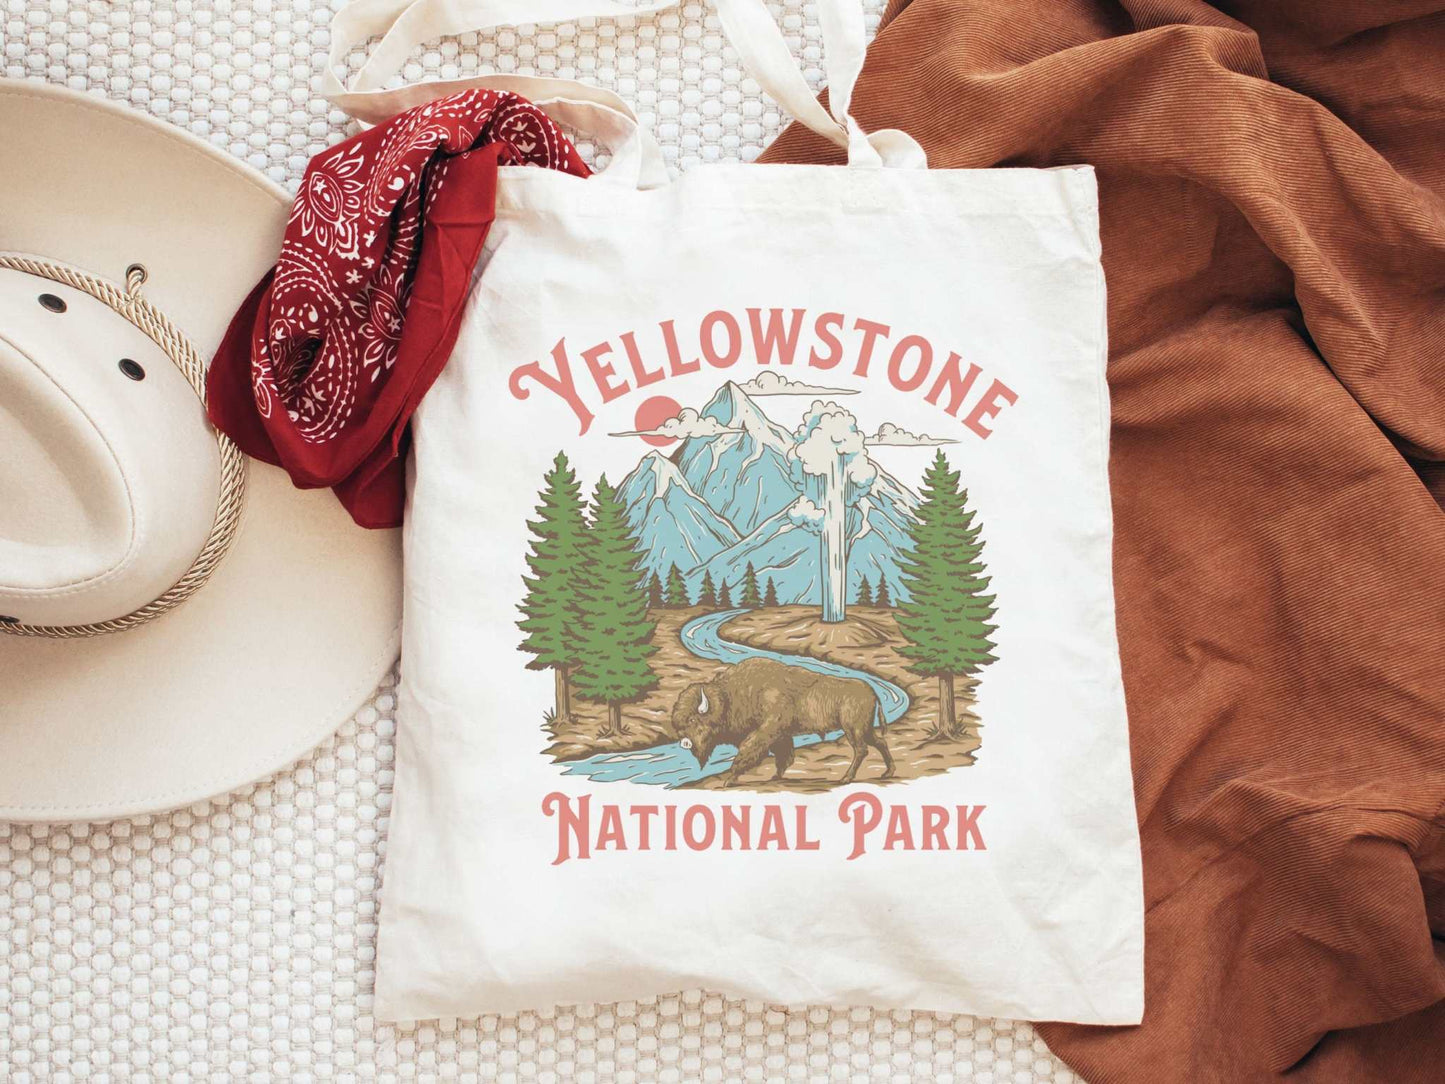 Yosemite National Park ToteDetails:
- 15.75"h x 15.25"w- handle length of 21.5”- made with 100% recycled cotton sheeting- reinforced handle stitching- lightweight and compact
 
The Lincoln For